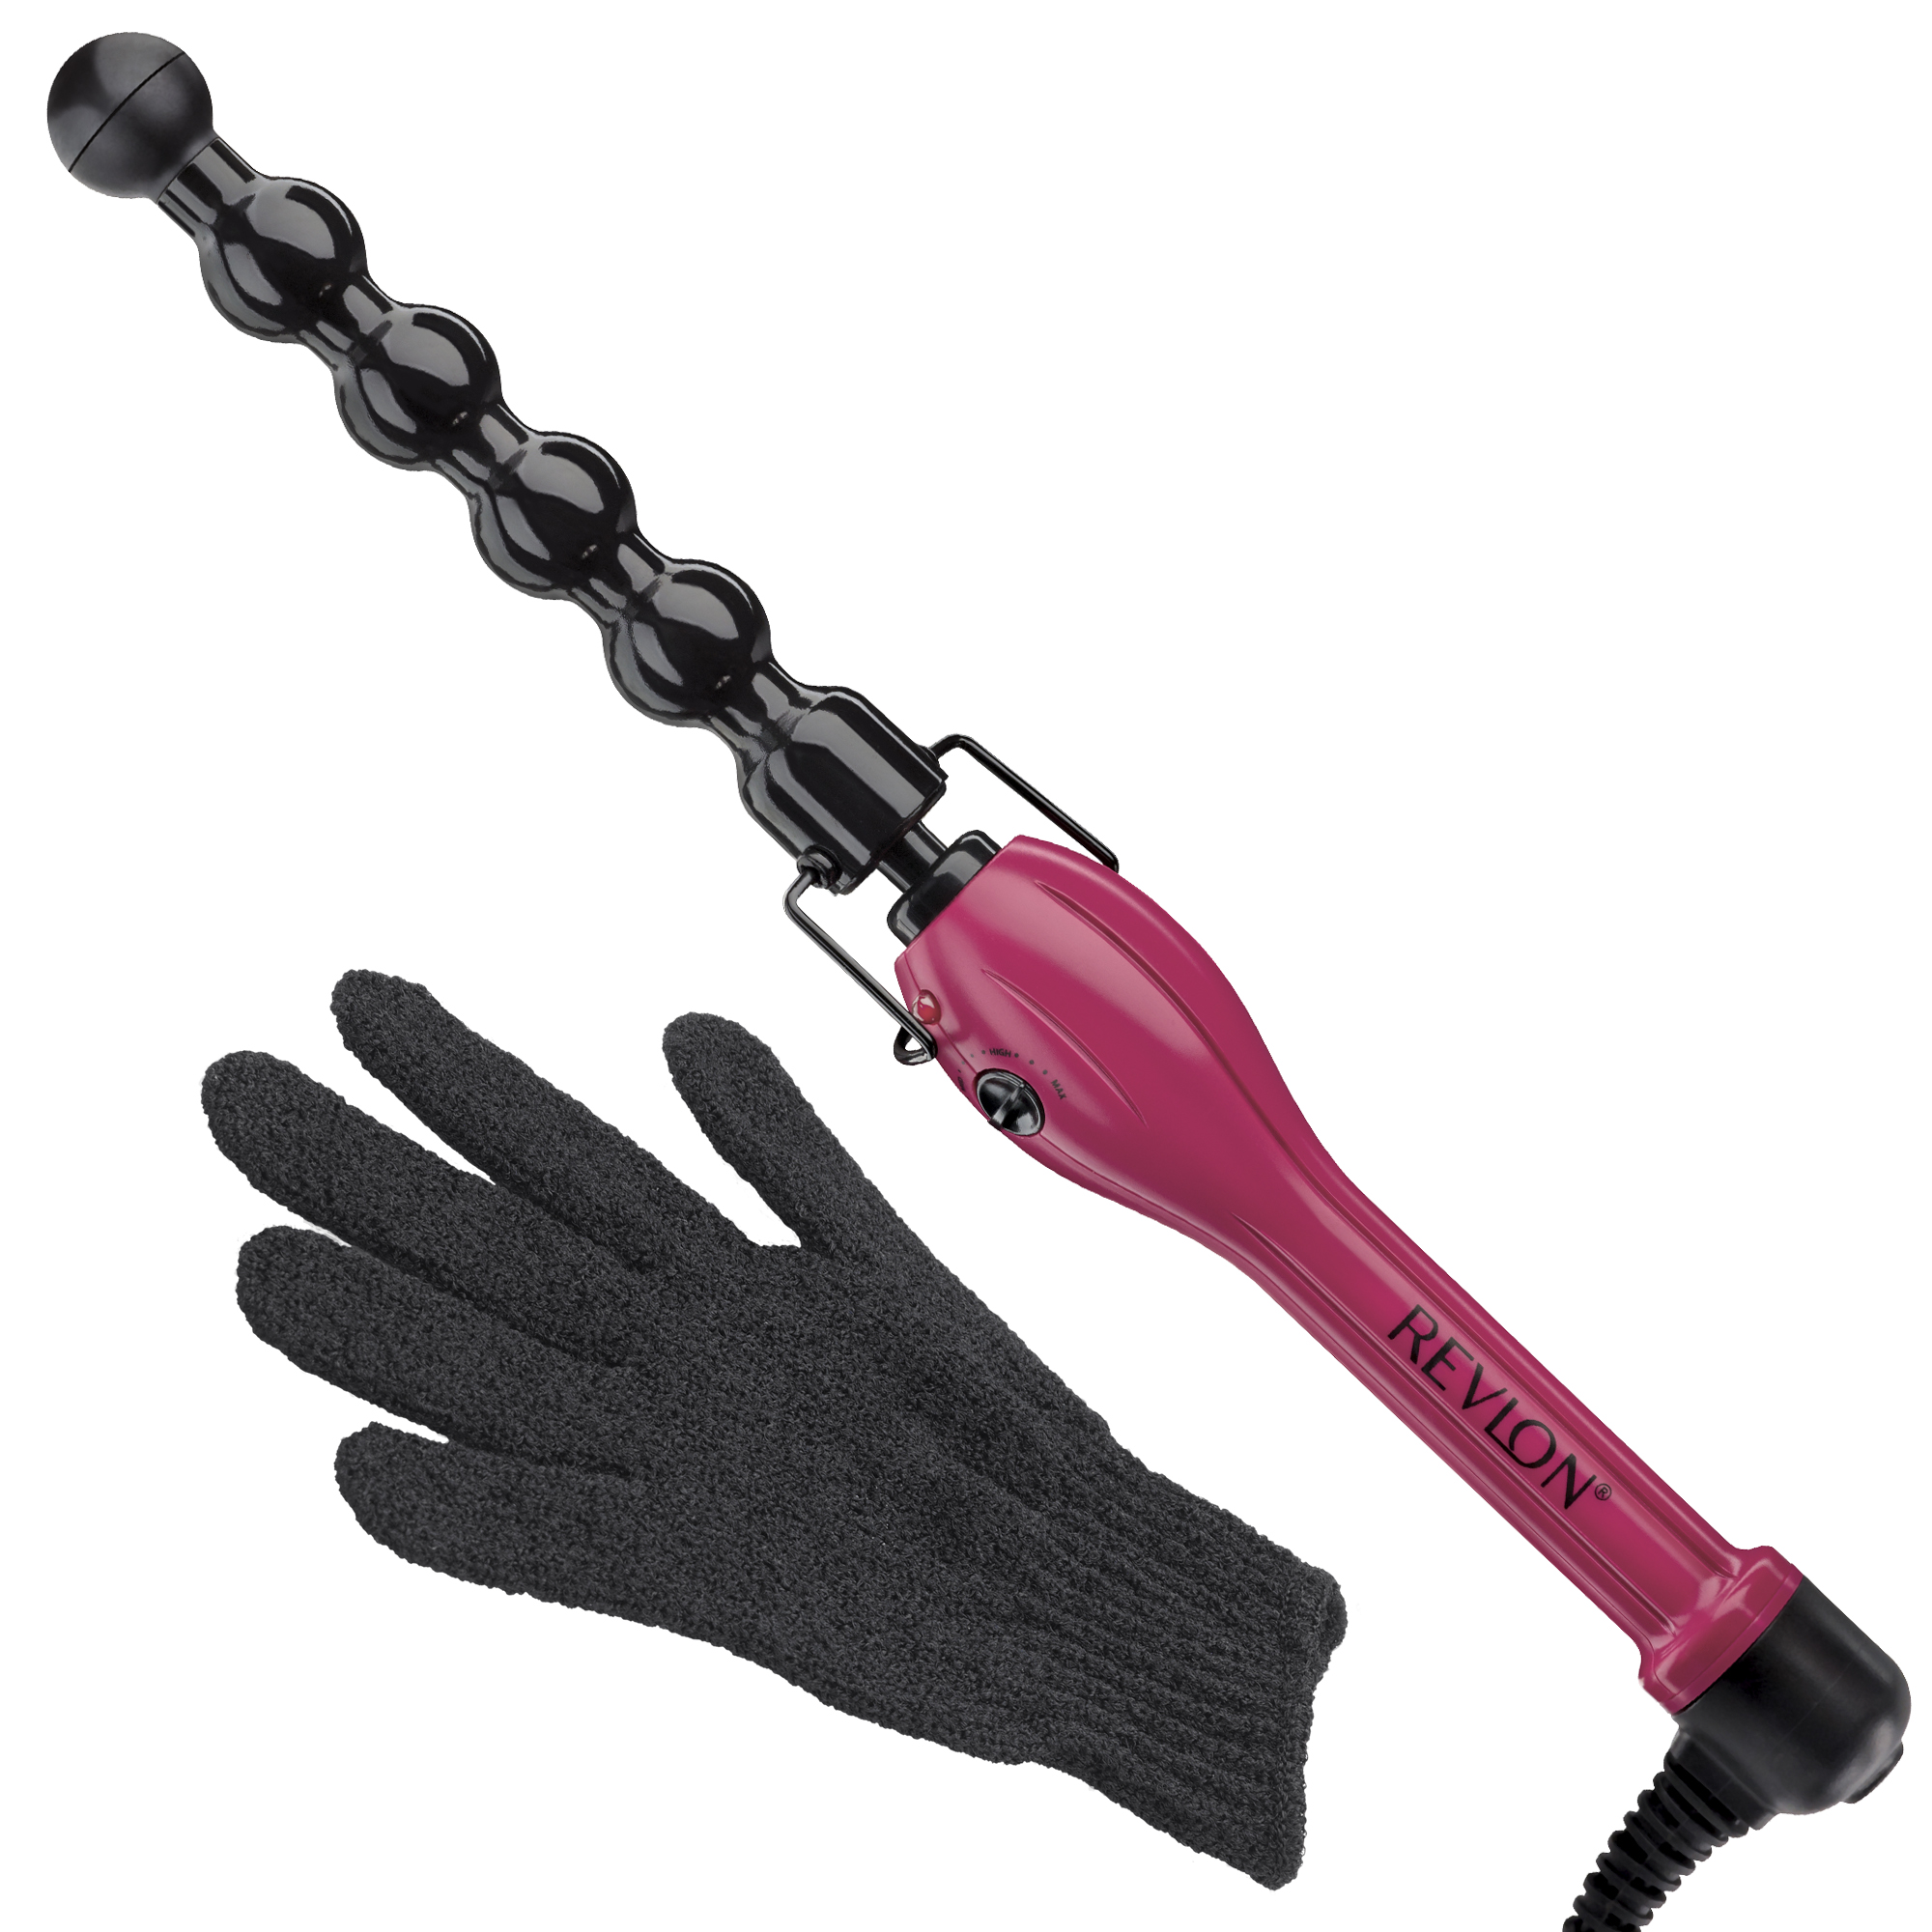 Revlon Pro Collection Ceramic Bubble Curling Wand, Pink with Protective Glove - image 1 of 4